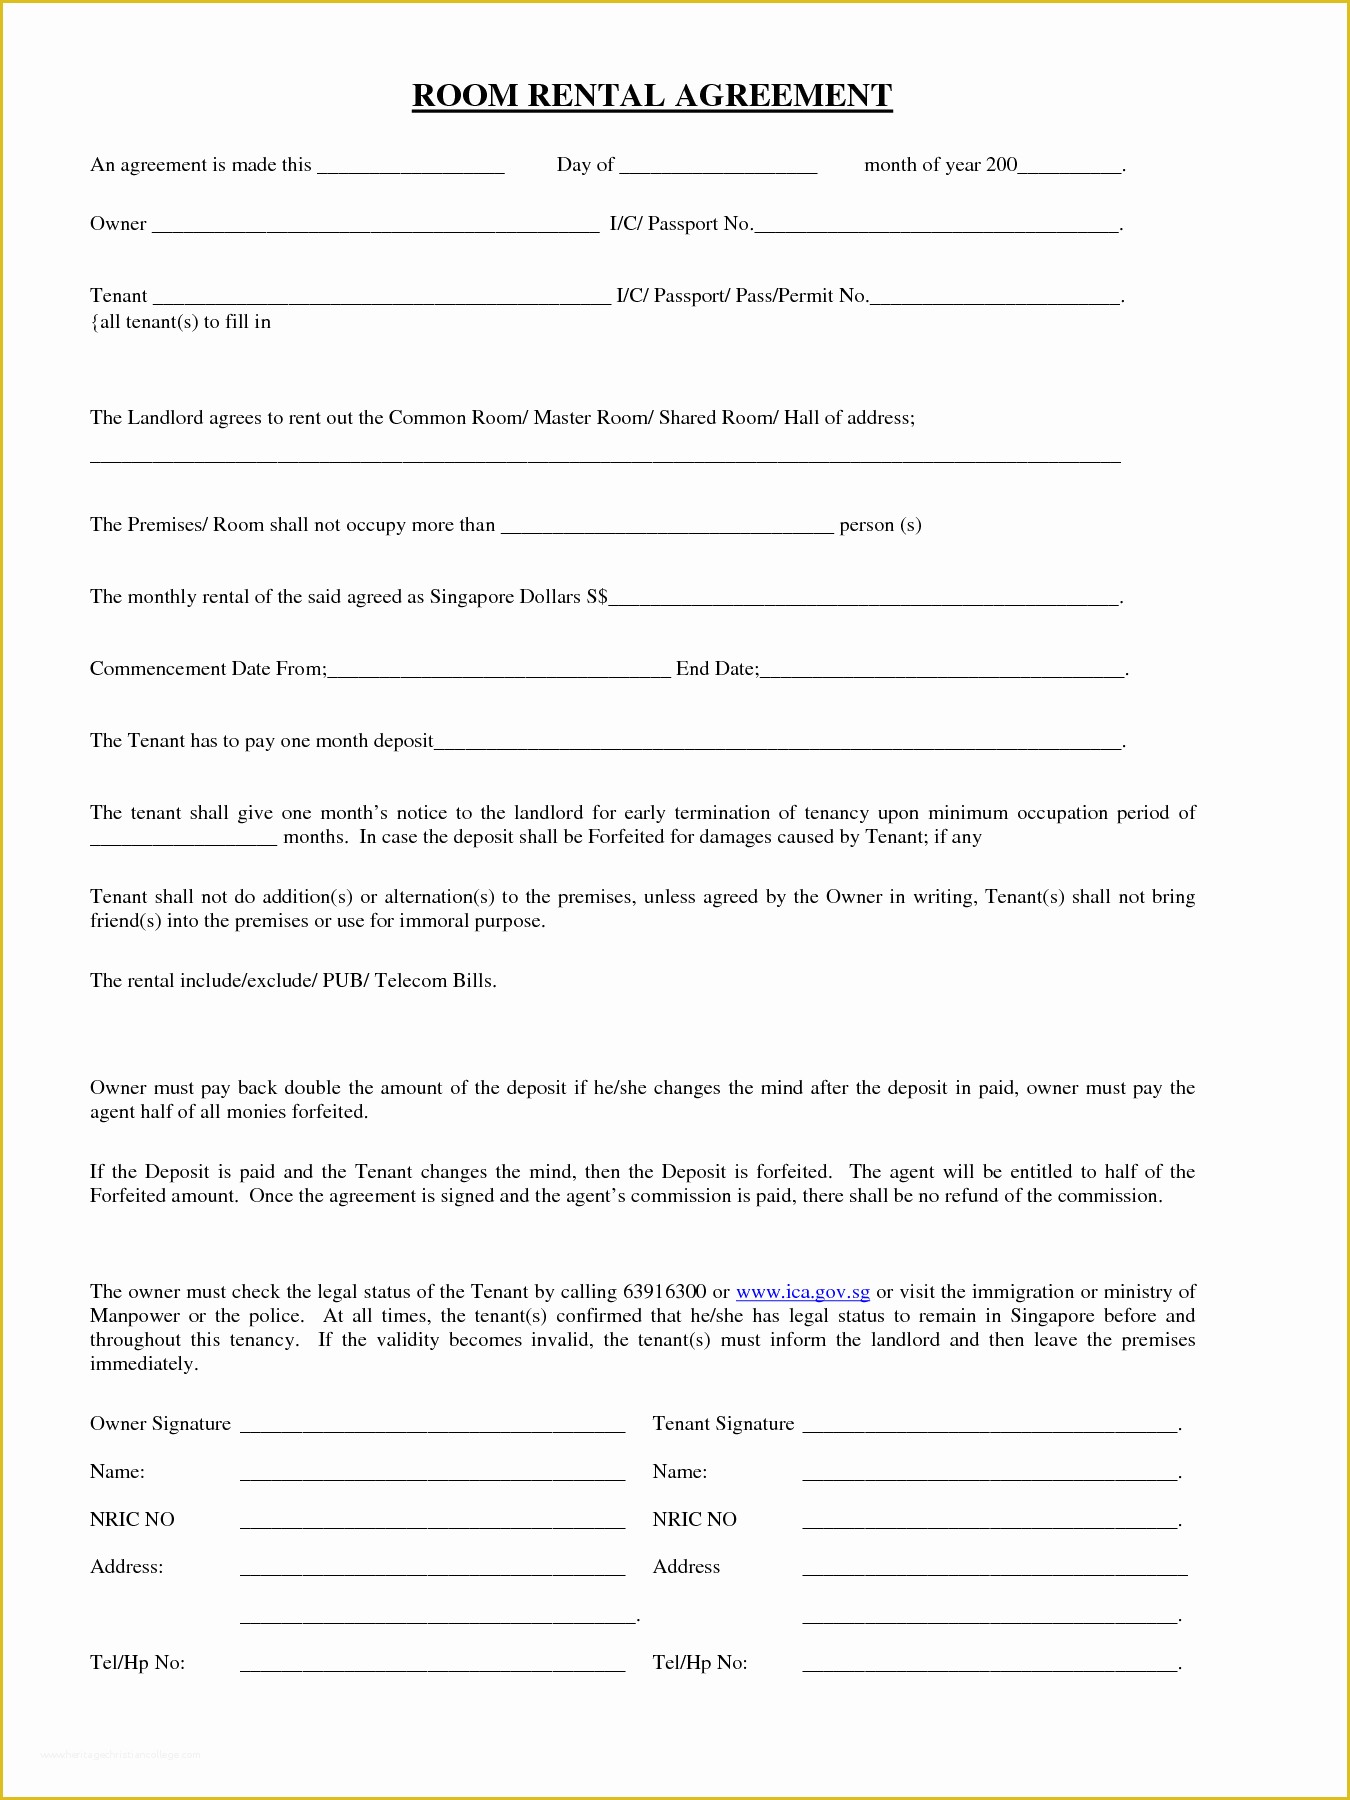 Free Room Rental Agreement Template Word Of Pin by Vanessa Melendez On Vanessa In 2018